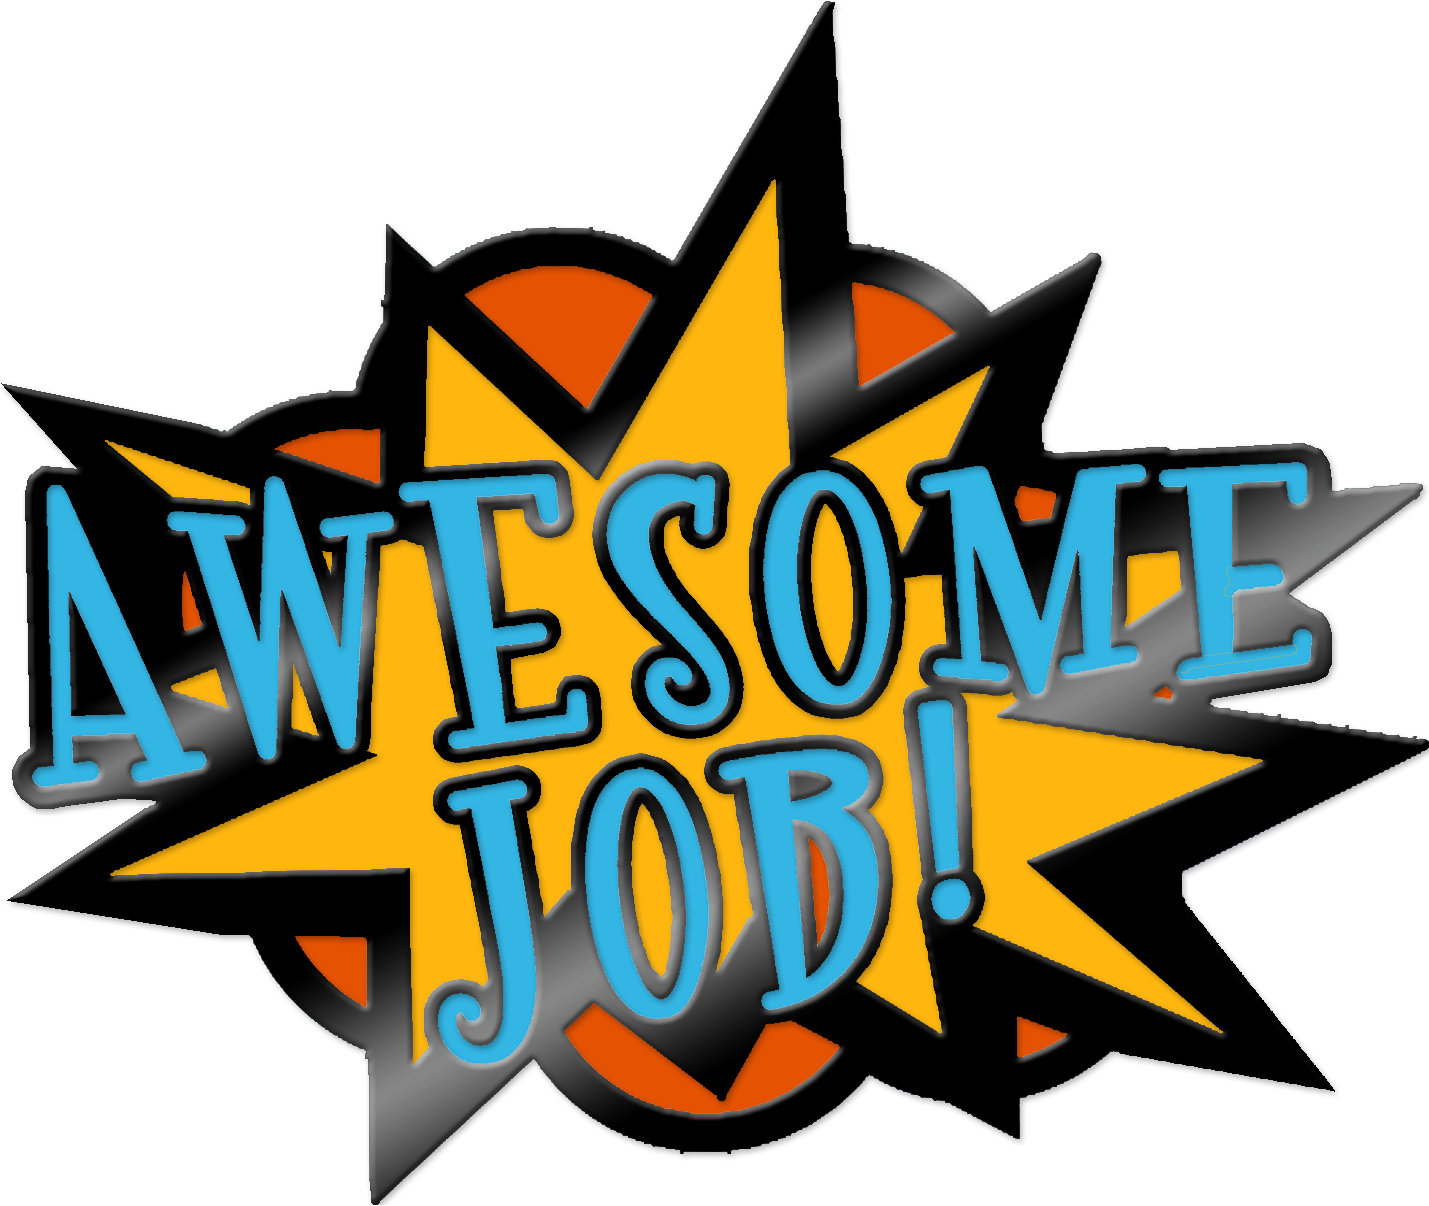 Awesome Job Clip Art - Graphic Design (2228x2004)